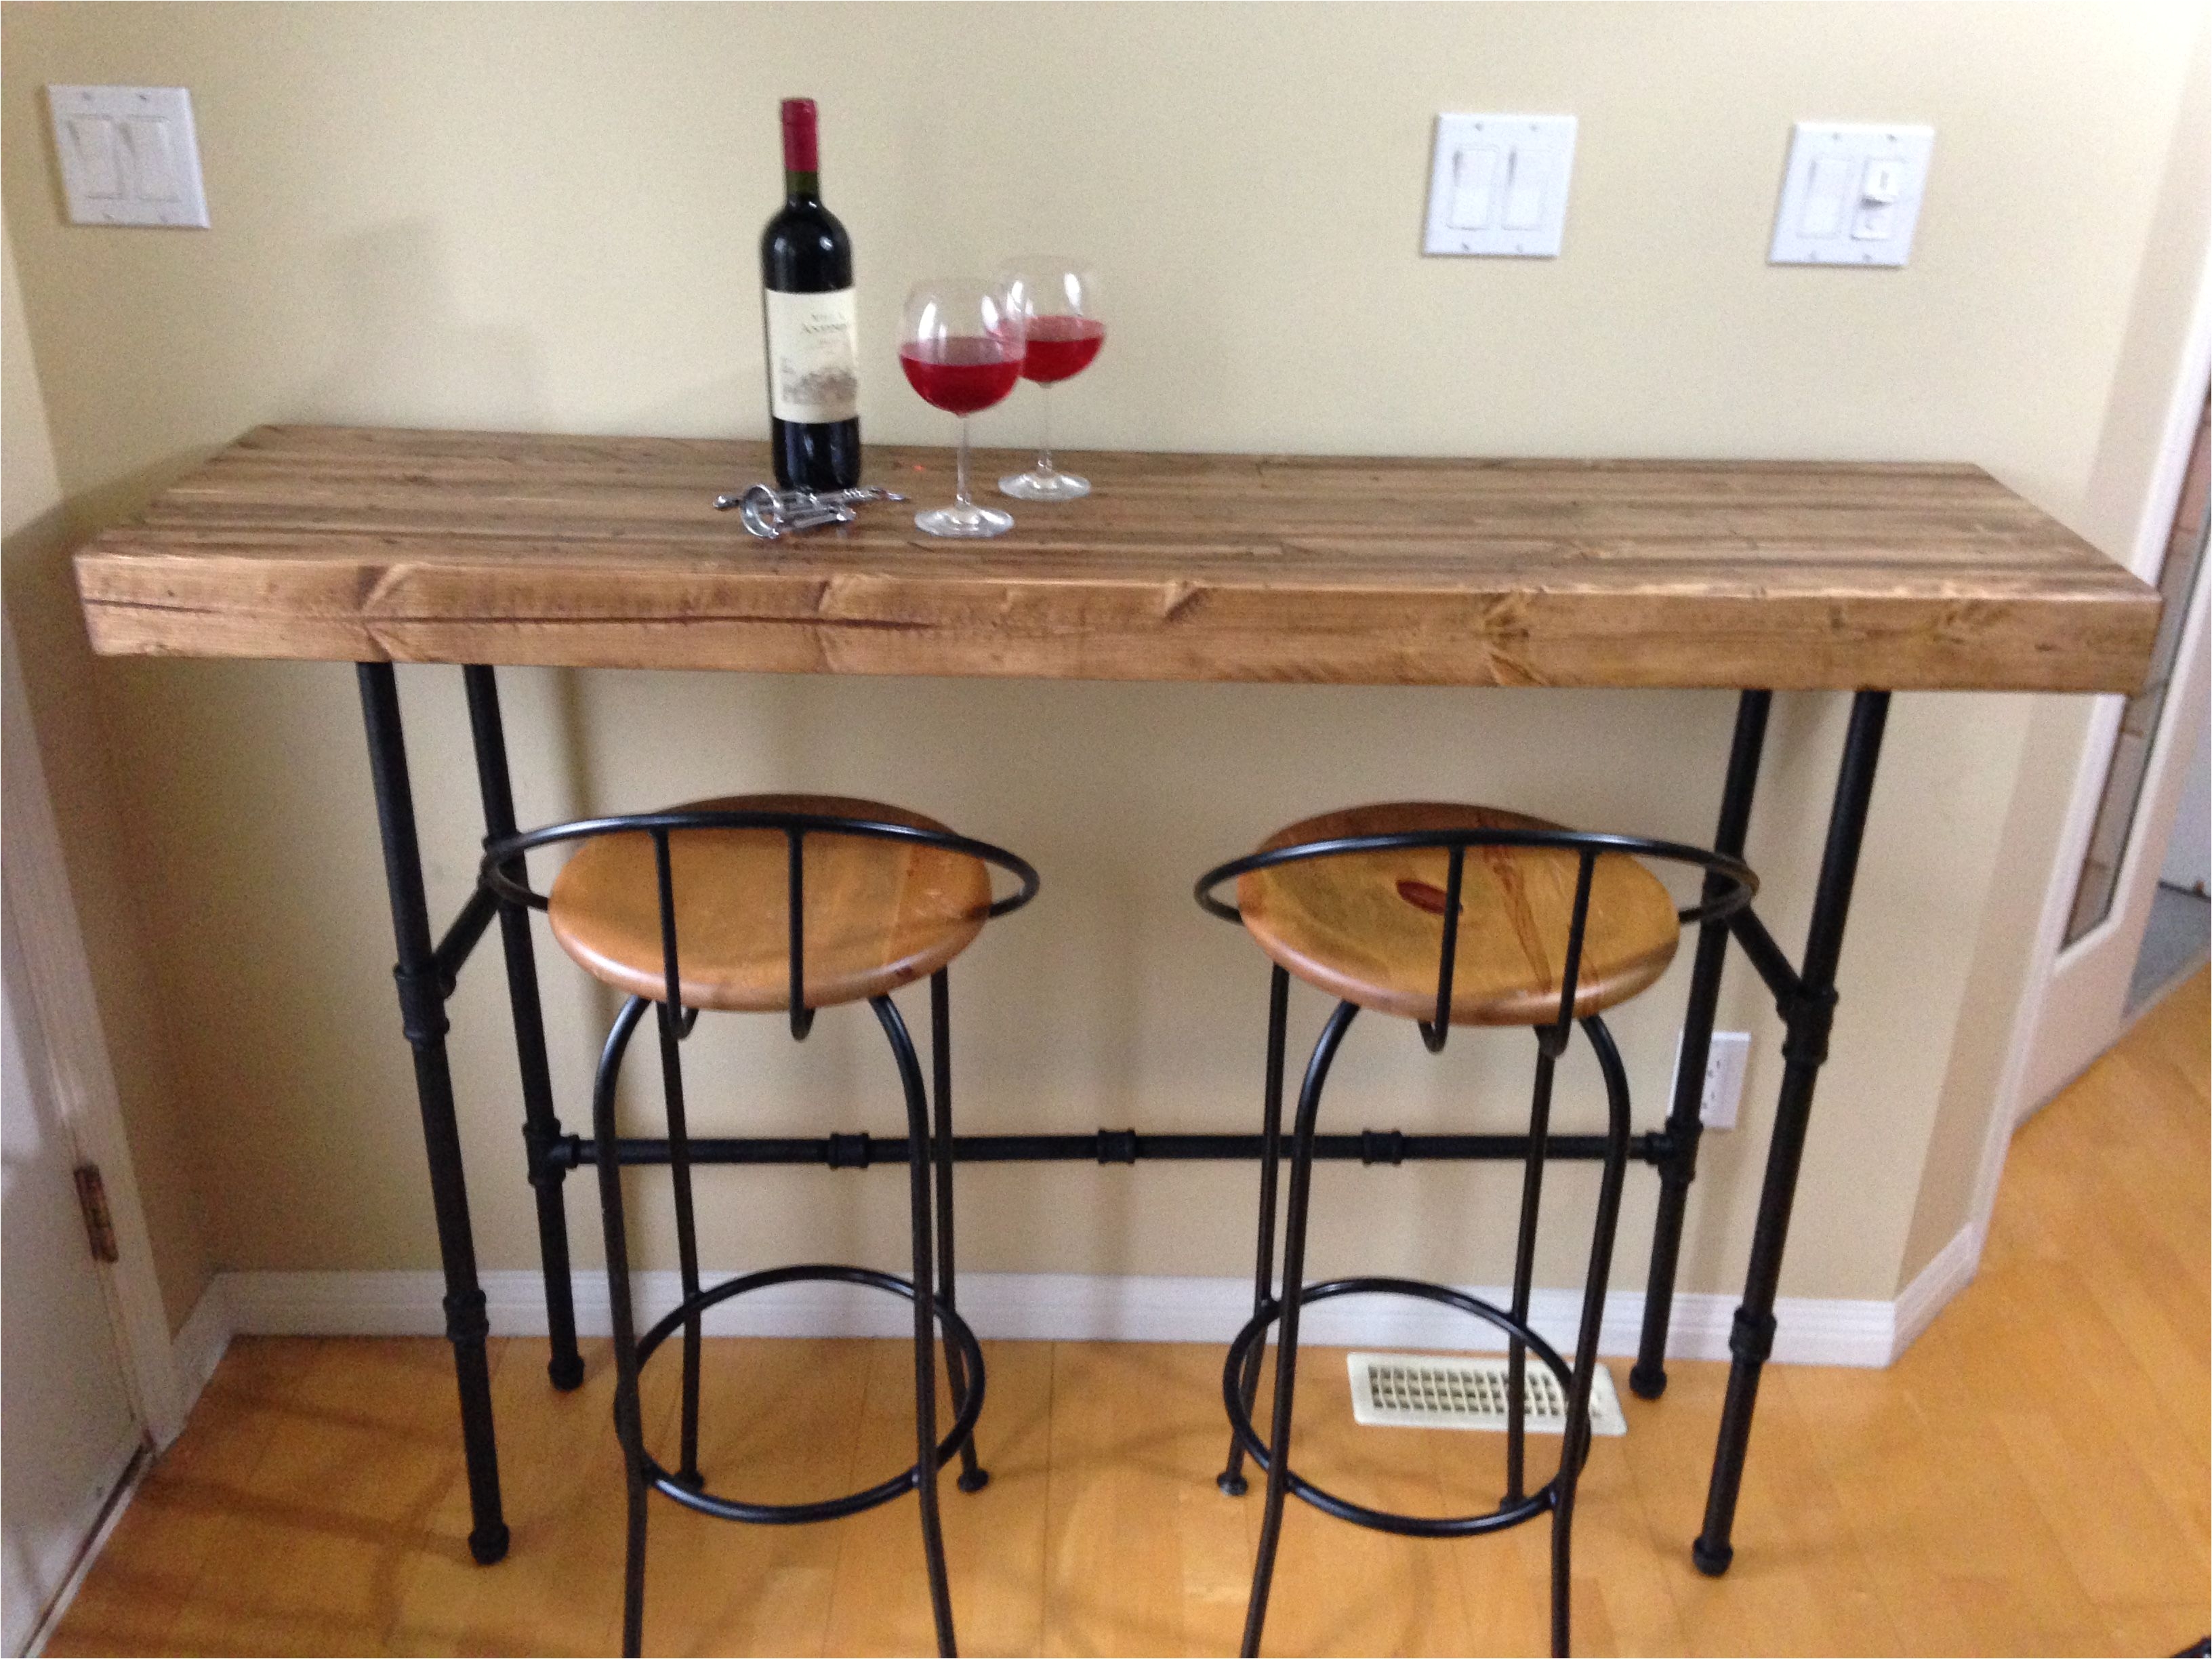 Beetle Kill Furniture Beetle Kill Spruce Kitchen Bar or Stand Up Desk I Recessed the Back